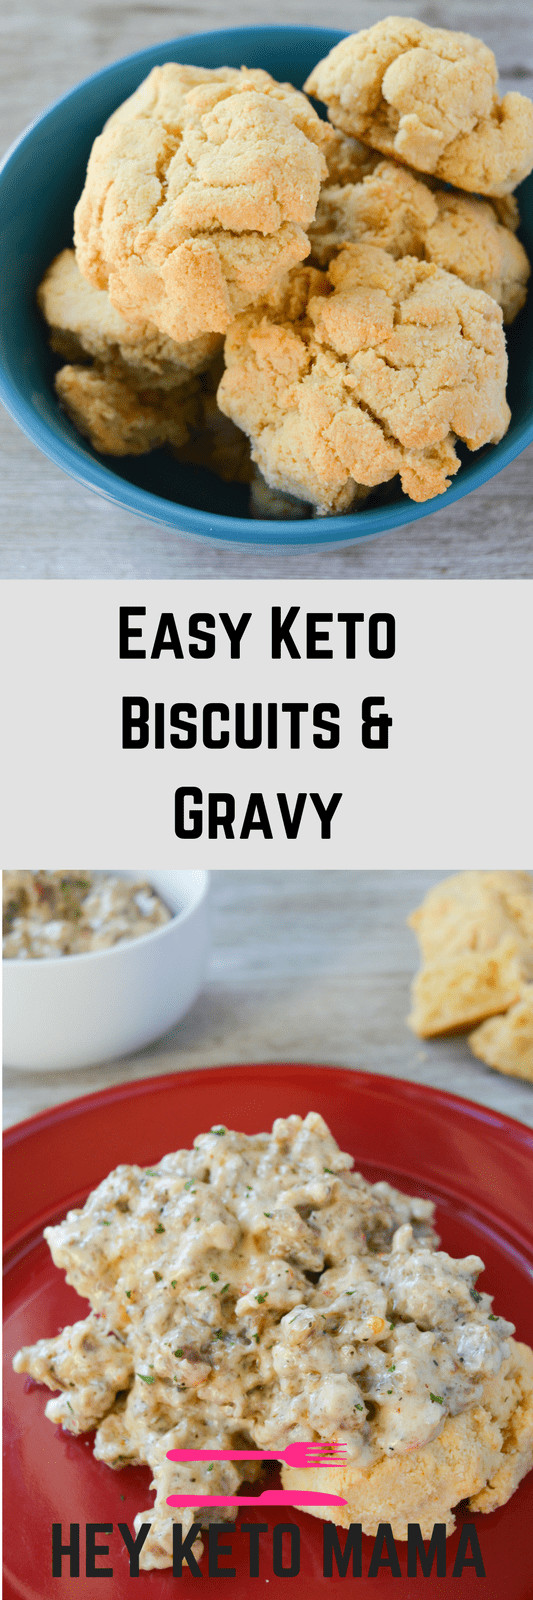 Keto Biscuits And Gravy Recipe
 Easy Keto Biscuits and Gravy Hey Keto Mama